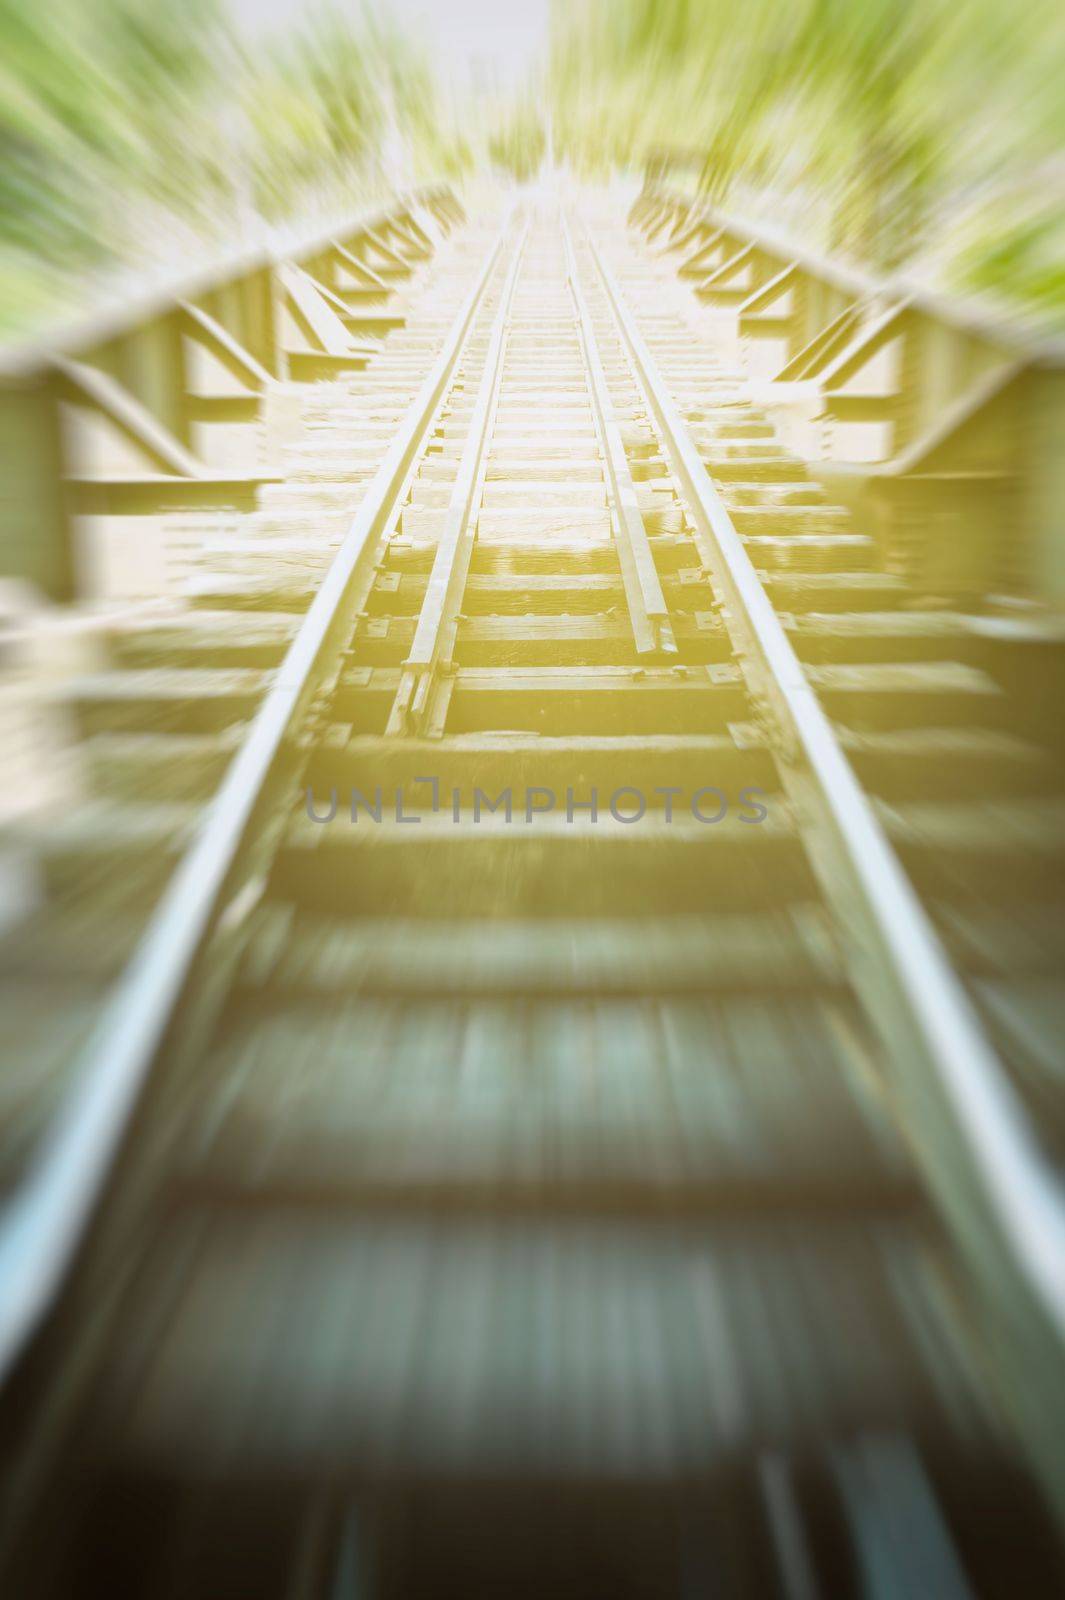 Railroad in Motion Blur. by mesamong